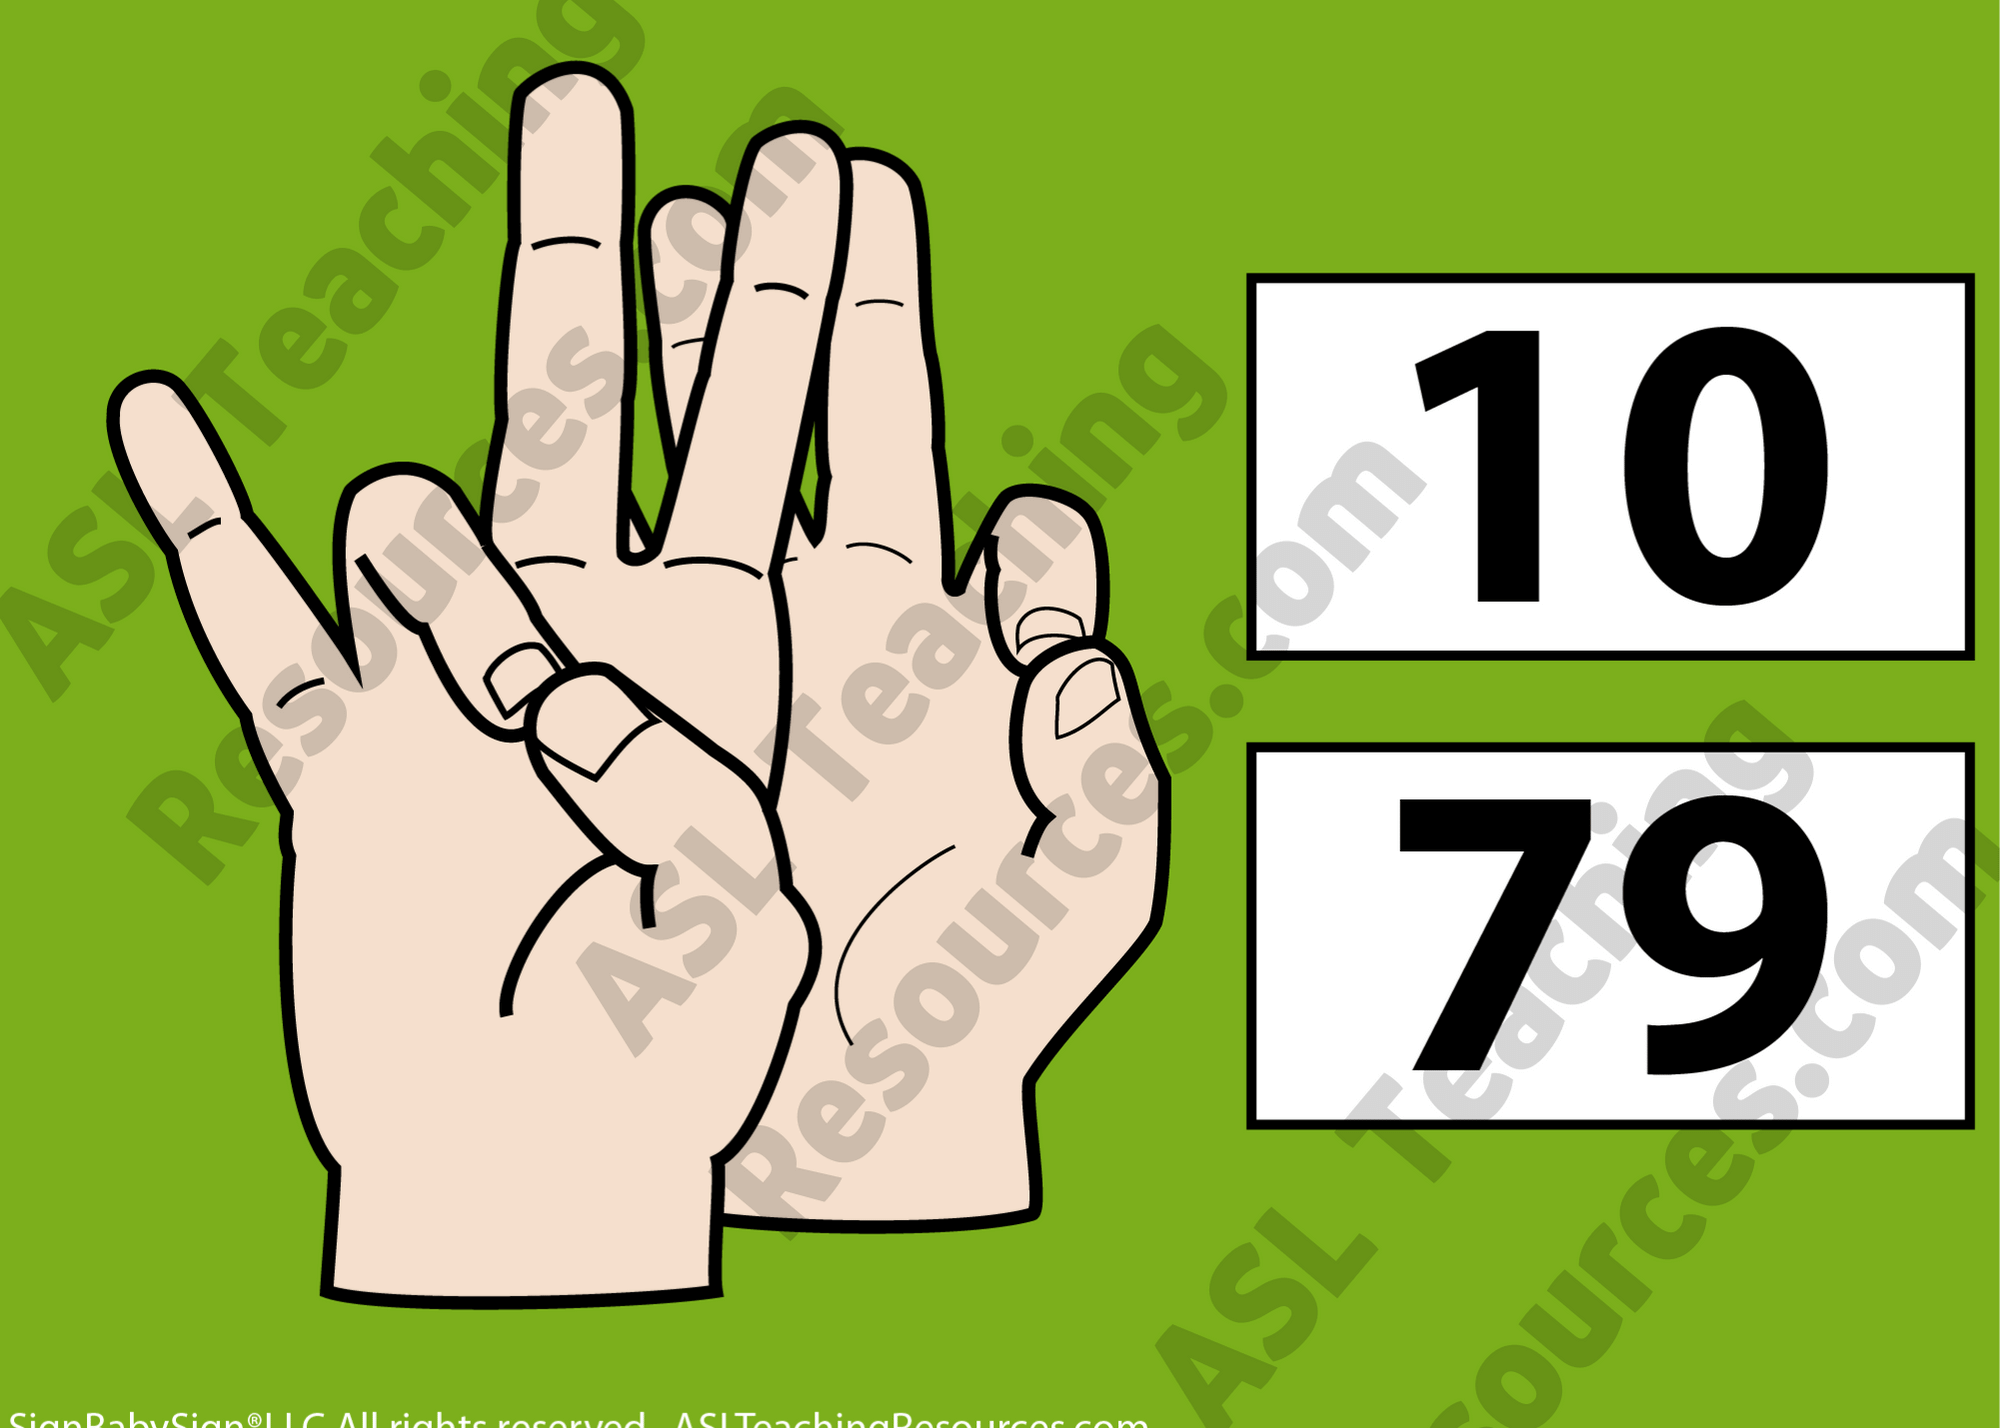 sign language numbers 1 100